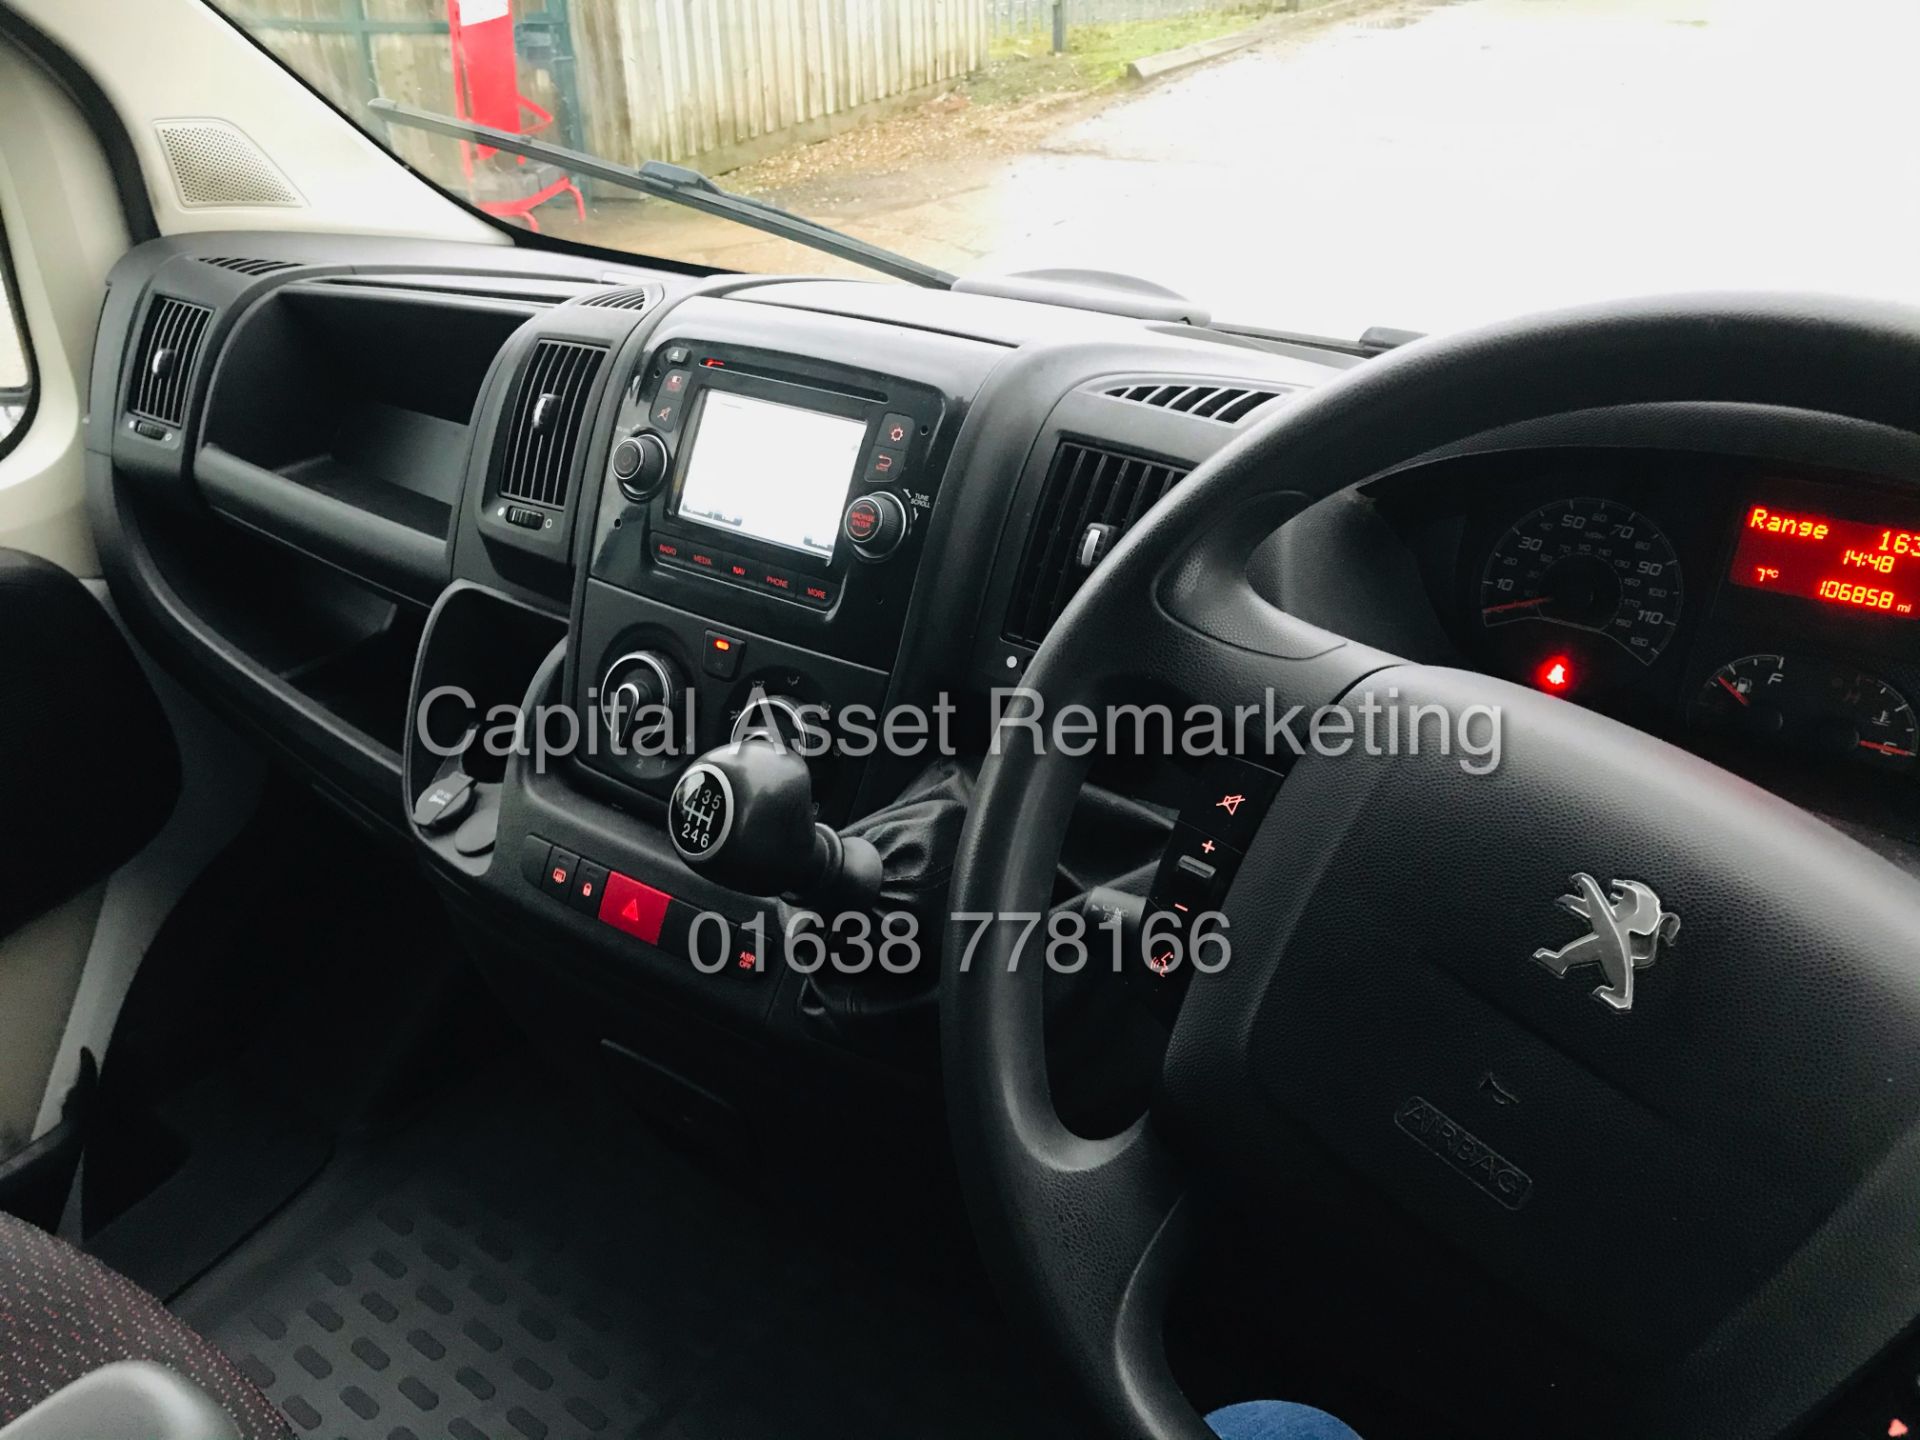 On Sale PEUGEOT BOXER 2.2HDI "PROFESSIONAL" (16 REG) 1 OWNER FSH *AIR CON* CRUISE -SAT NAV - Image 25 of 32